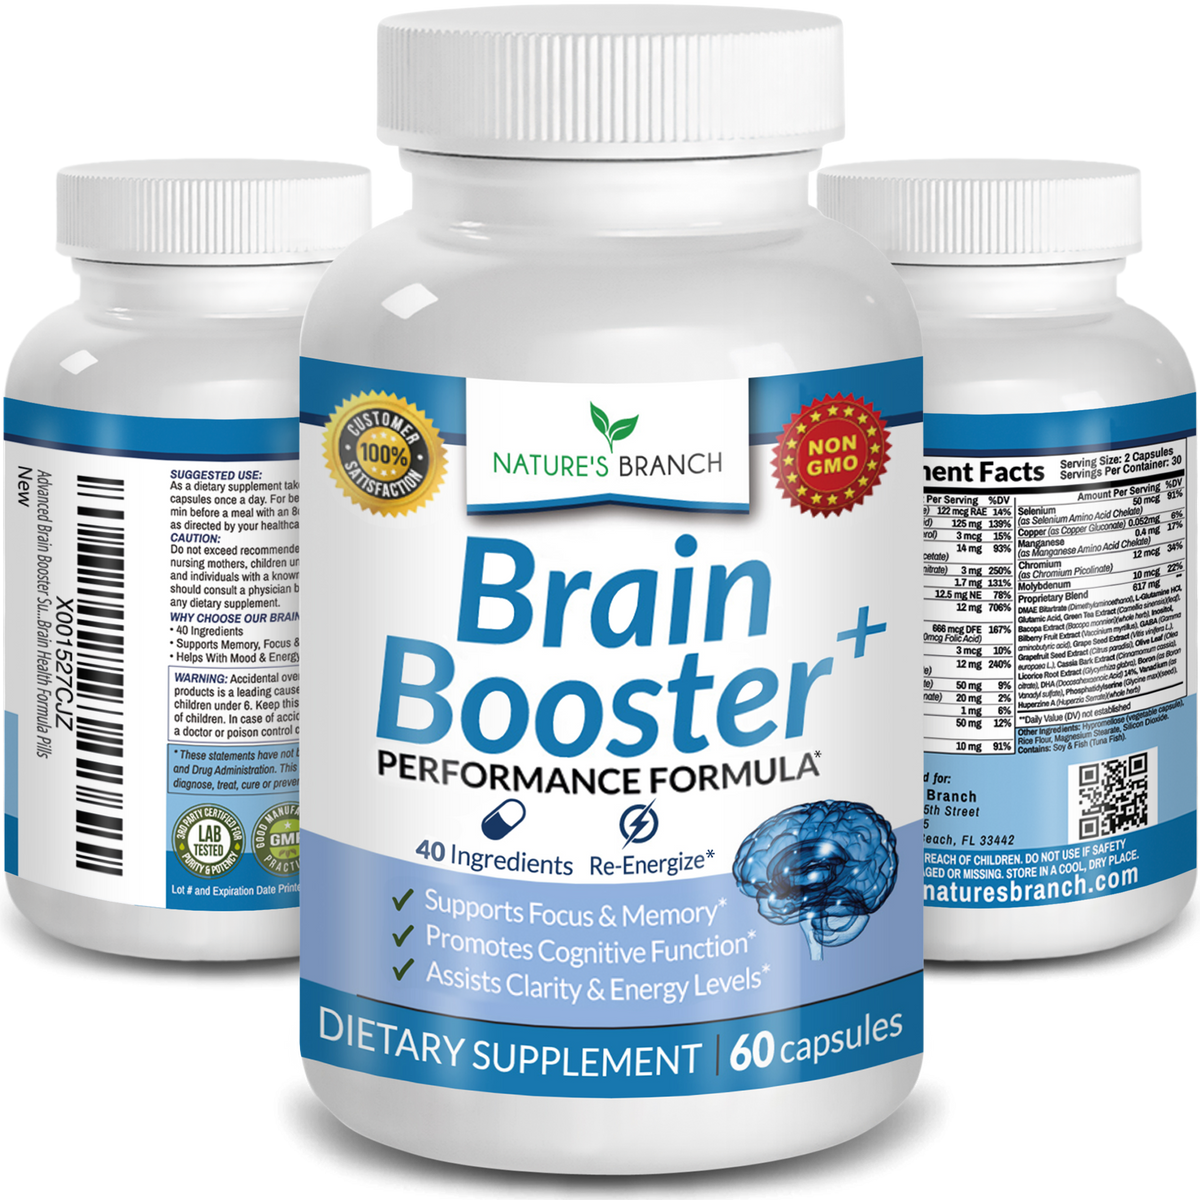 Nature&#39;s Branch Brain Booster supplement bottles for focus, memory and clarity